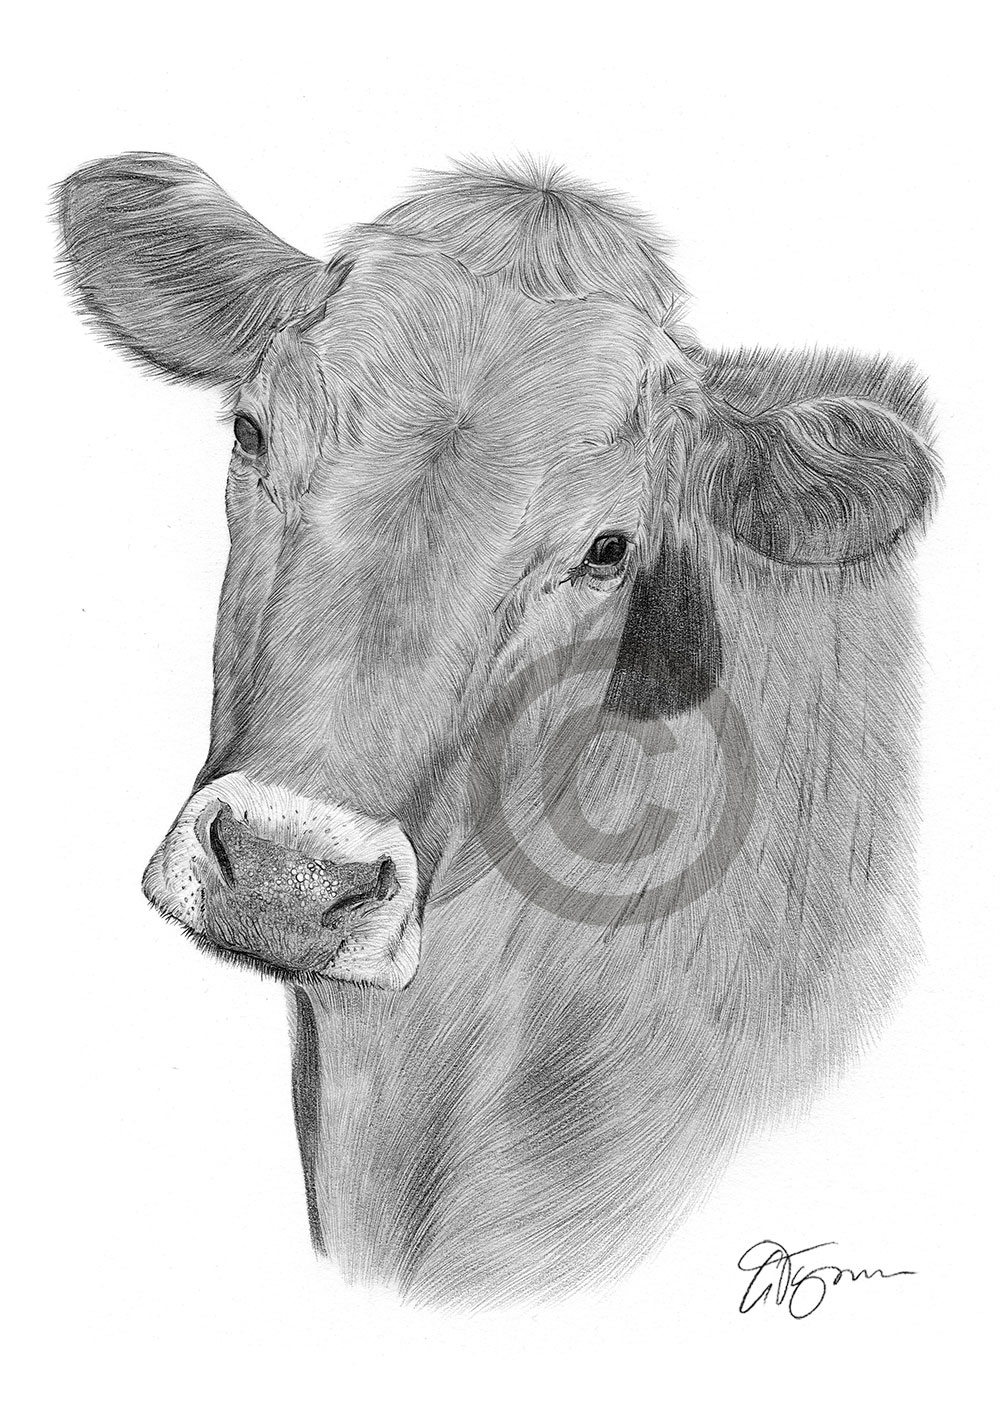 Pencil drawing of a cow by UK artist Gary Tymon